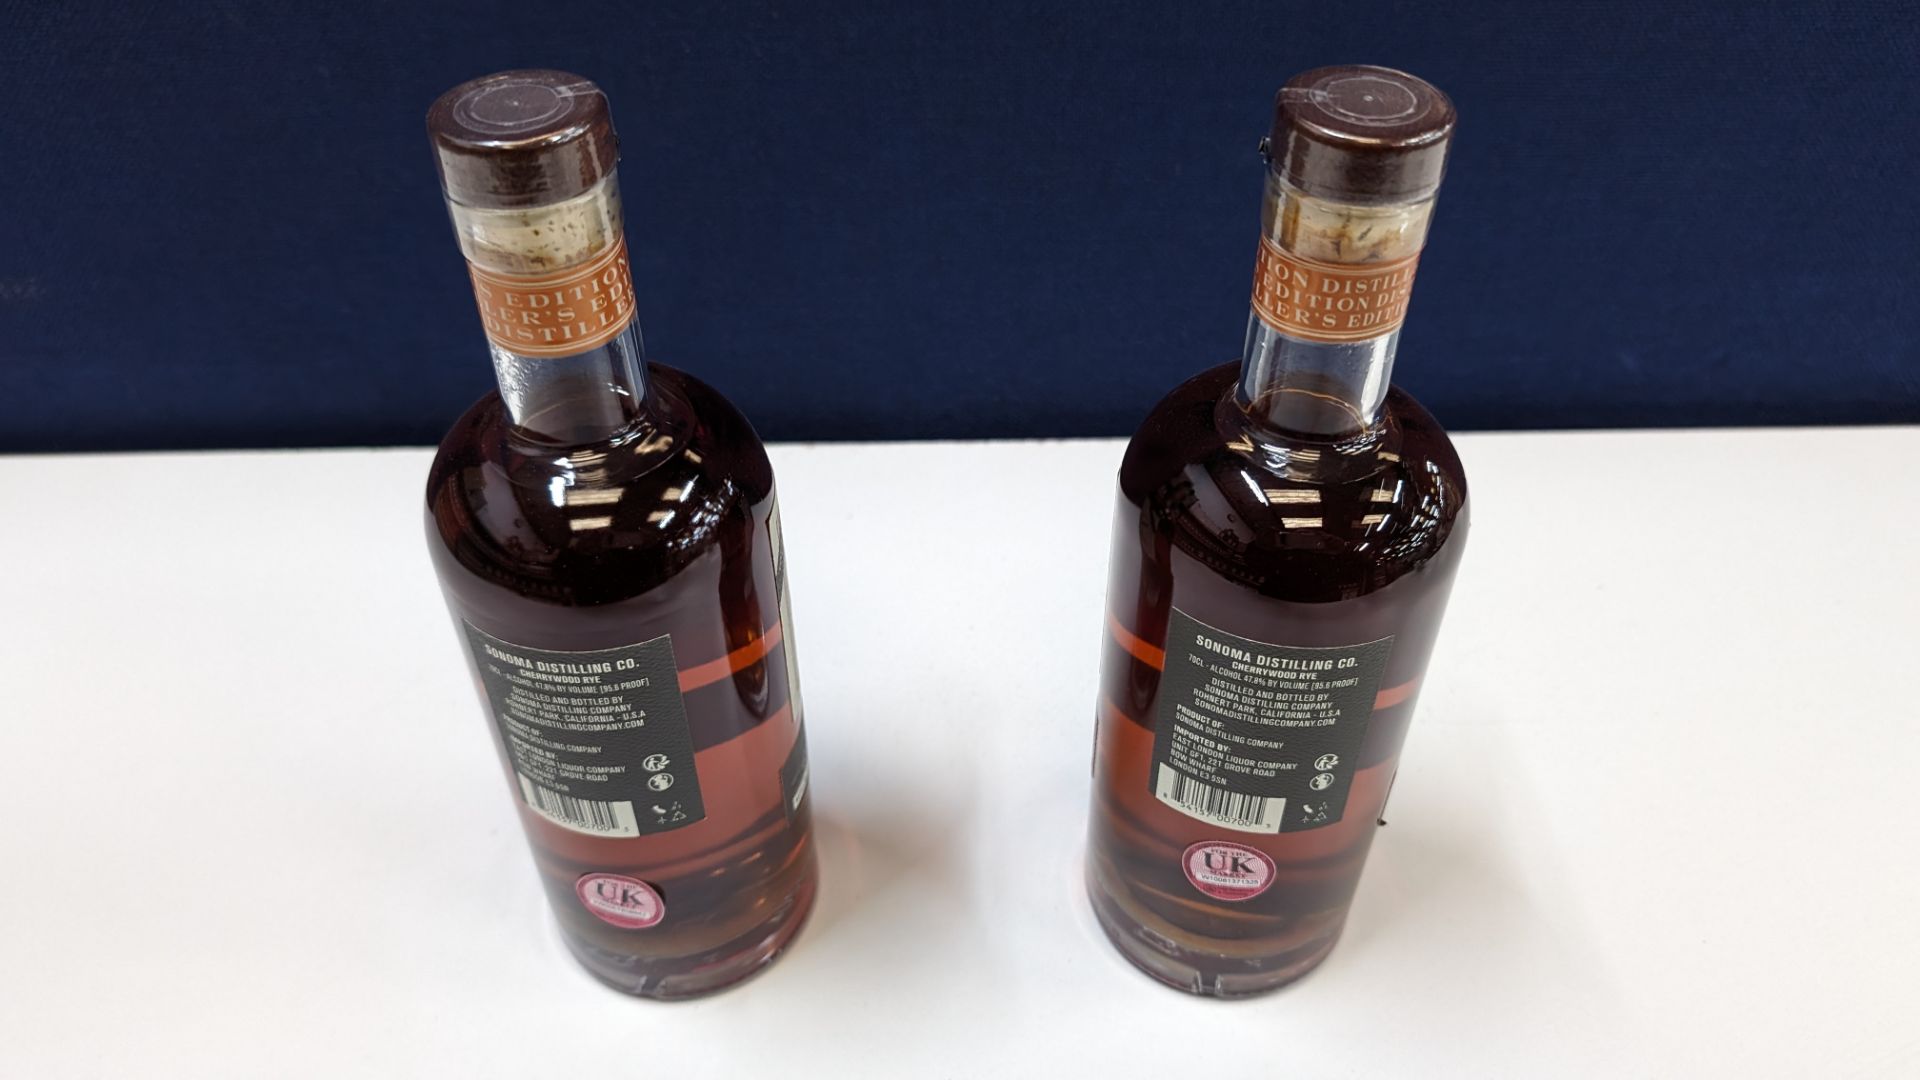 2 off 700ml bottles of Sonoma Cherrywood Rye Whiskey. 47.8% alc/vol (95.6 proof). Distilled and bo - Image 3 of 6